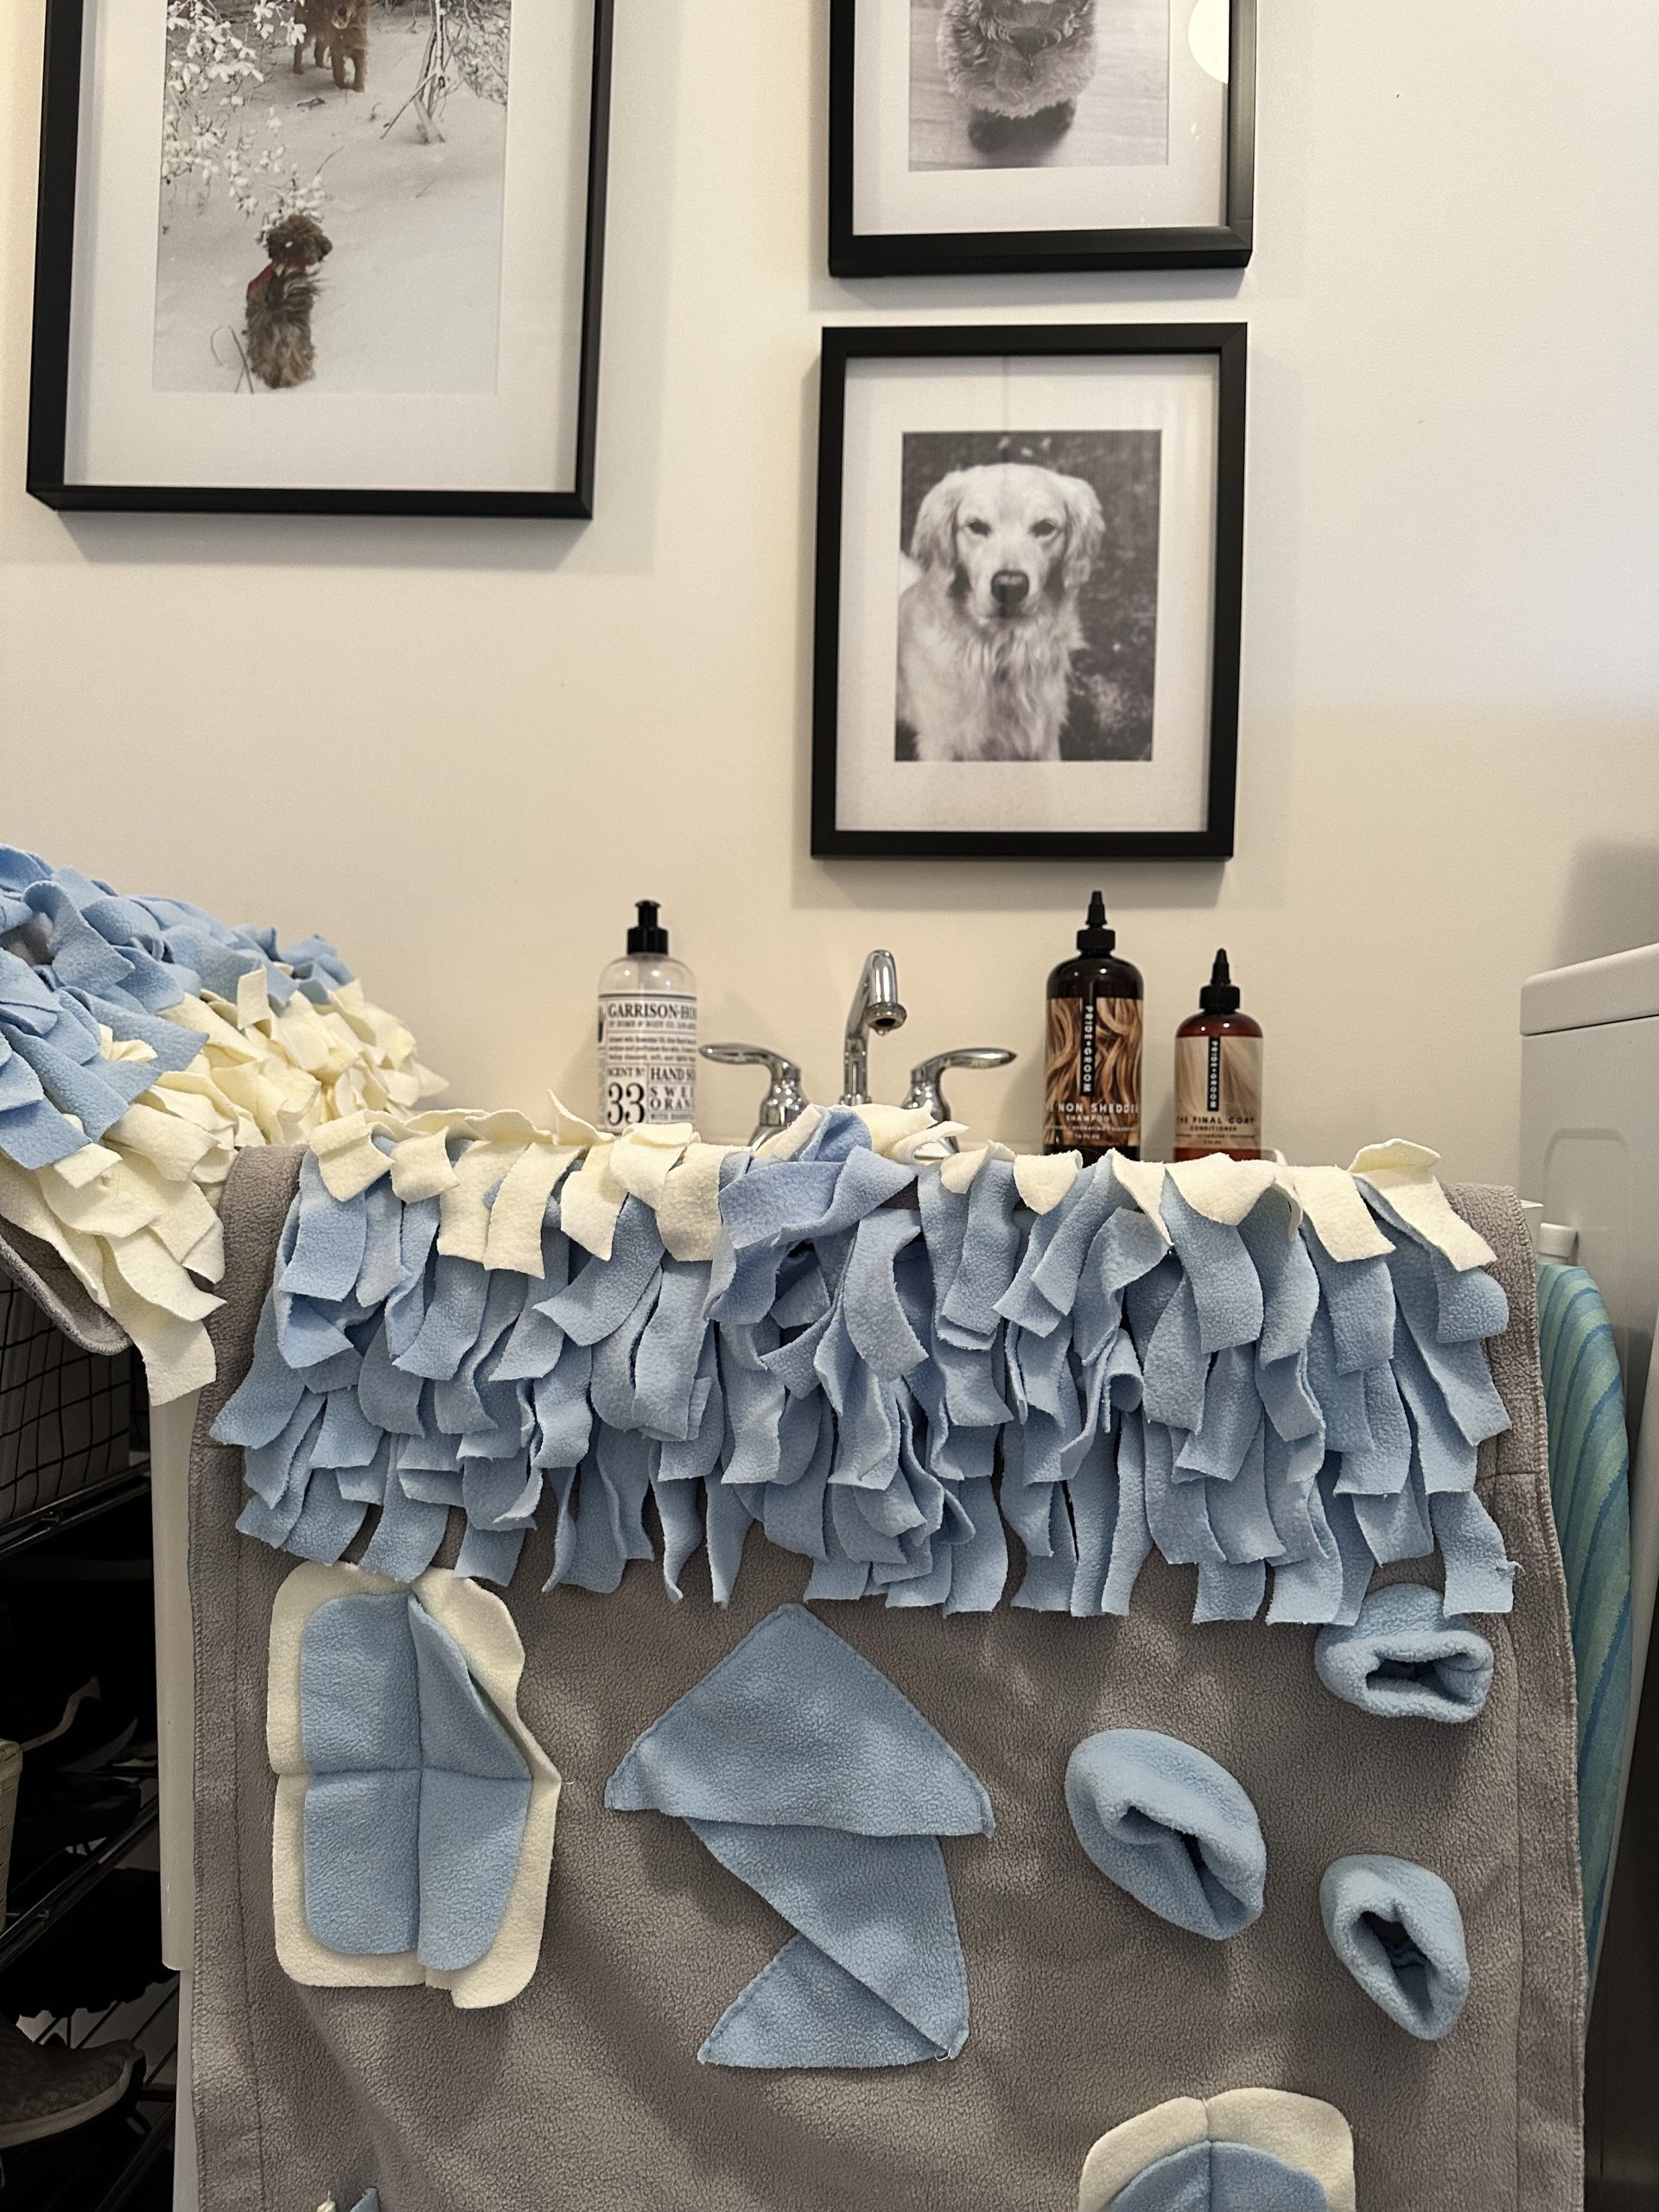 Fleece snuffle mat air drying in laundry room with pics of dogs above sink